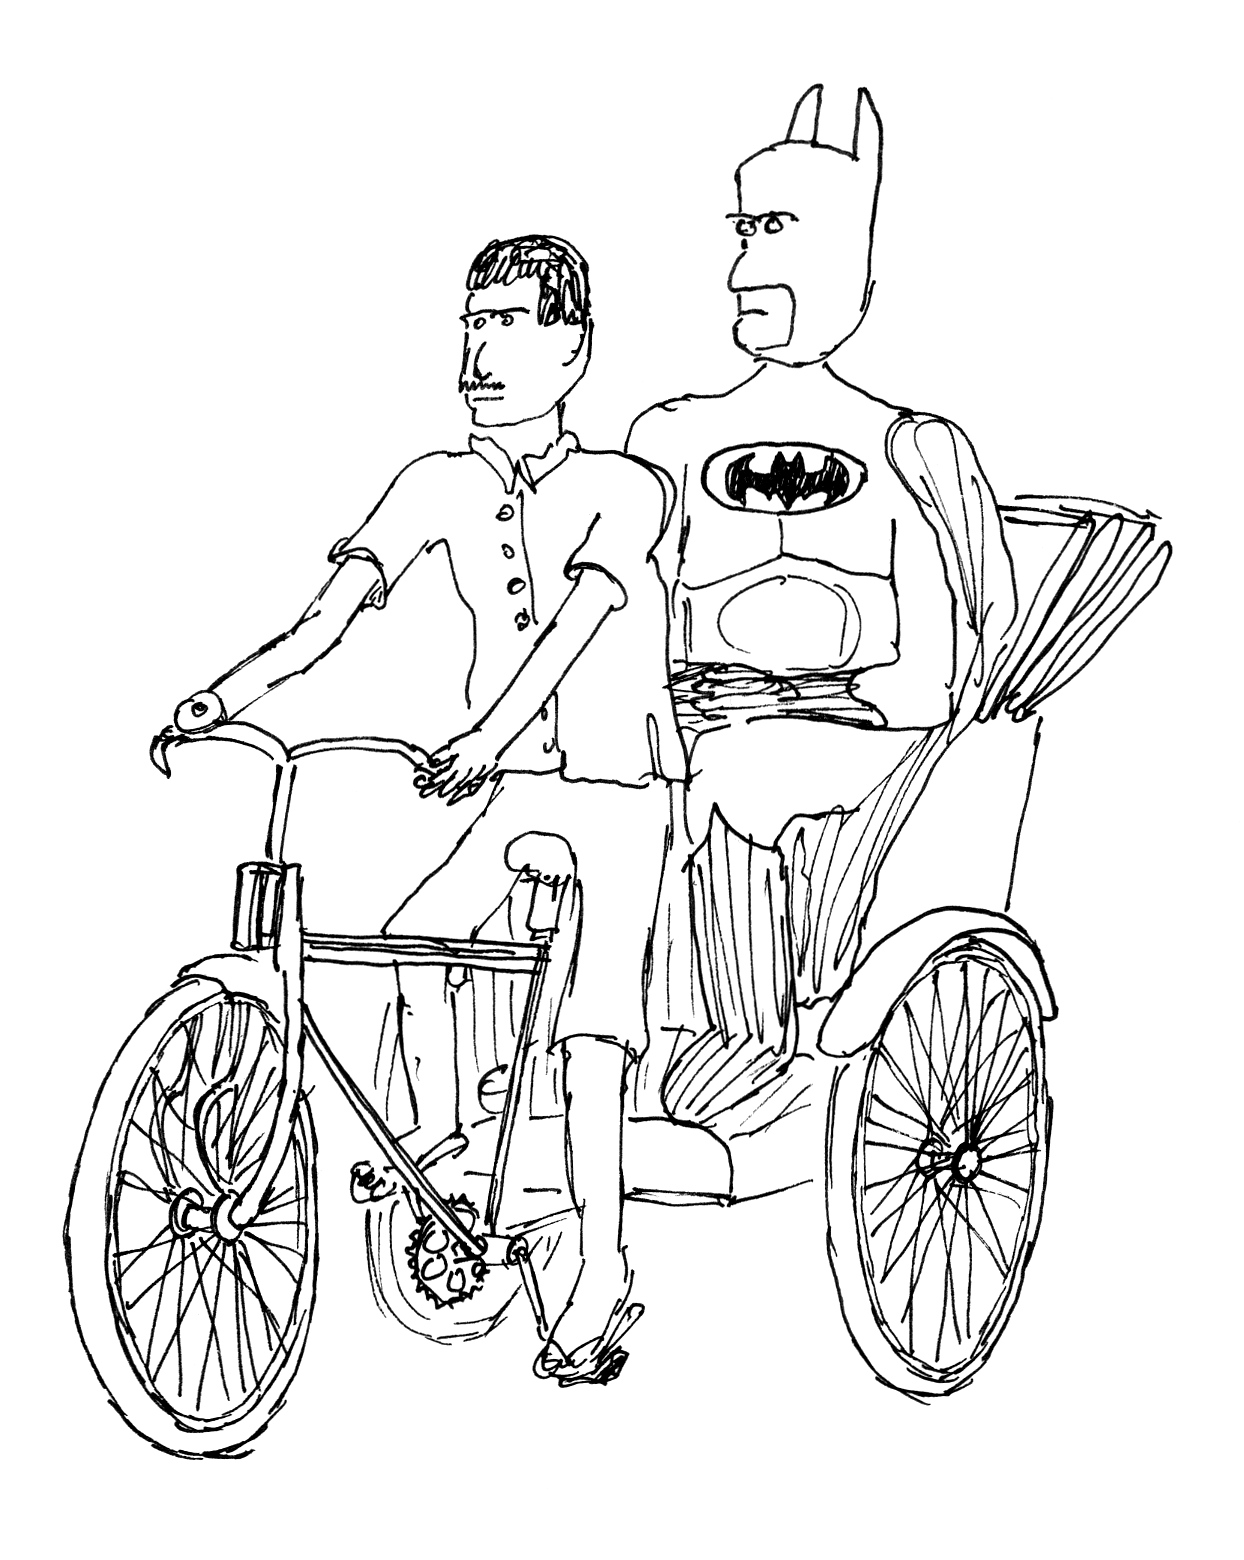 Batman gets a lift after his imprisonment, in a deleted scene from The Dark Knight Rises.